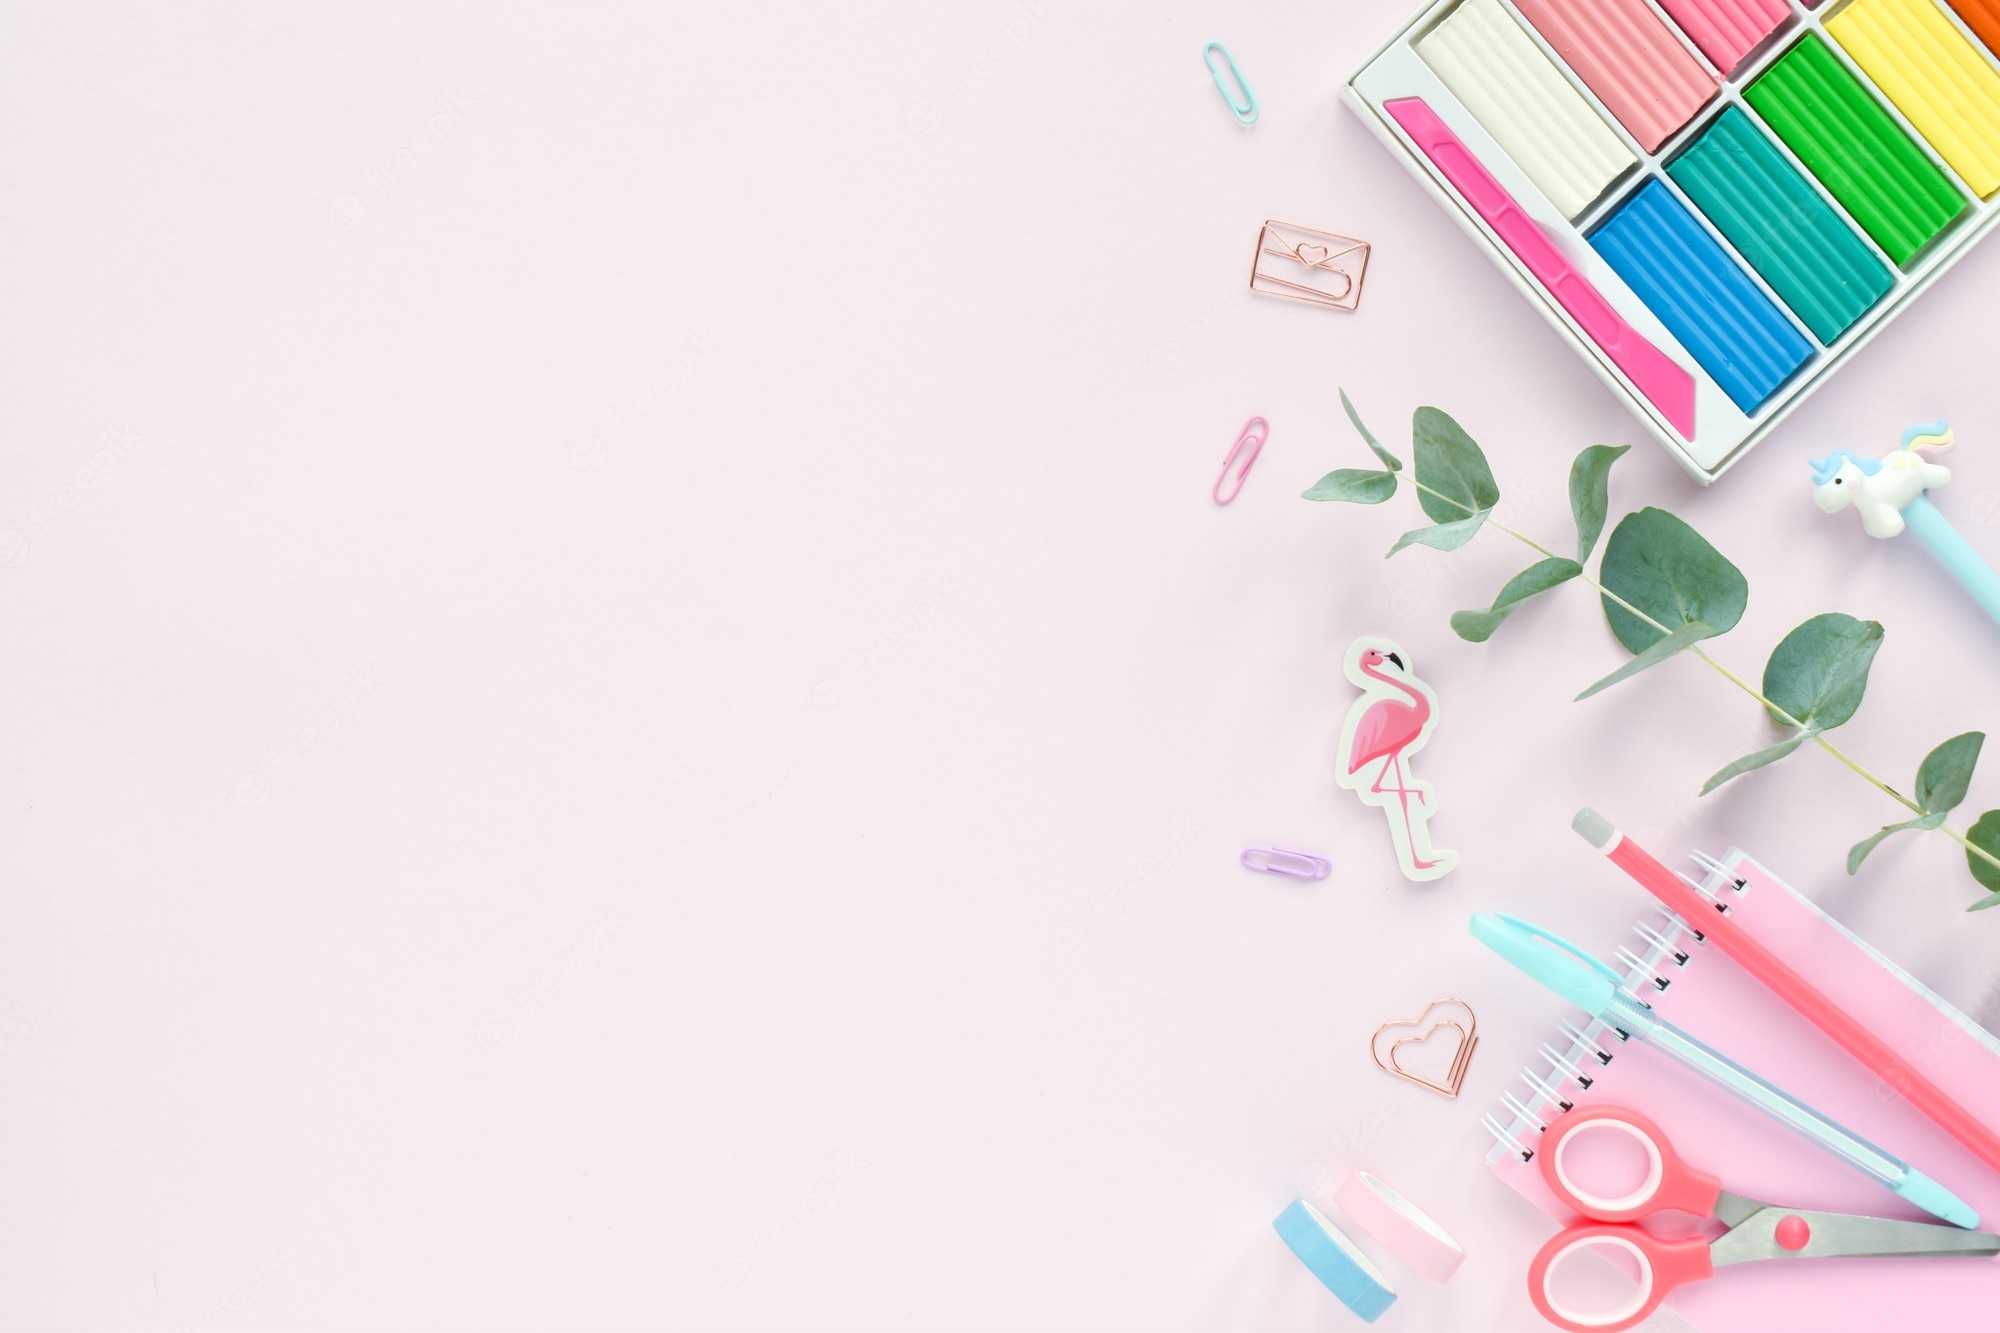 Premium Photo. A Frame Of Pastel Colored School Supplies On A Pink Background, A Place For Text. Back To The School. Office Supplies. Flat Lay, Top View, Copy Space